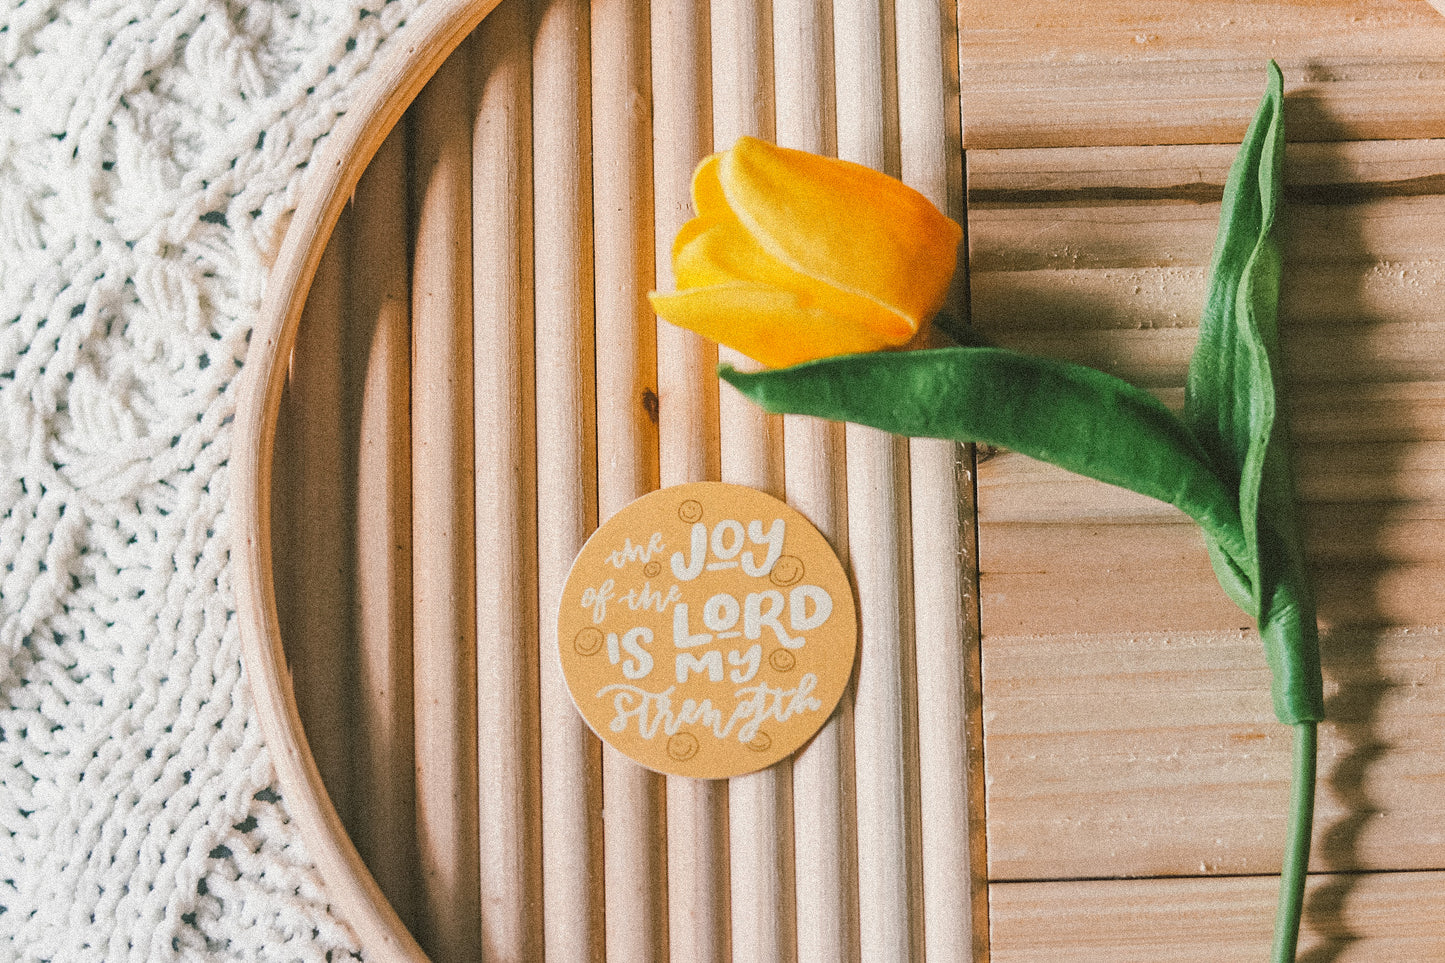 'The joy of the Lord is my strength' handlettered sticker